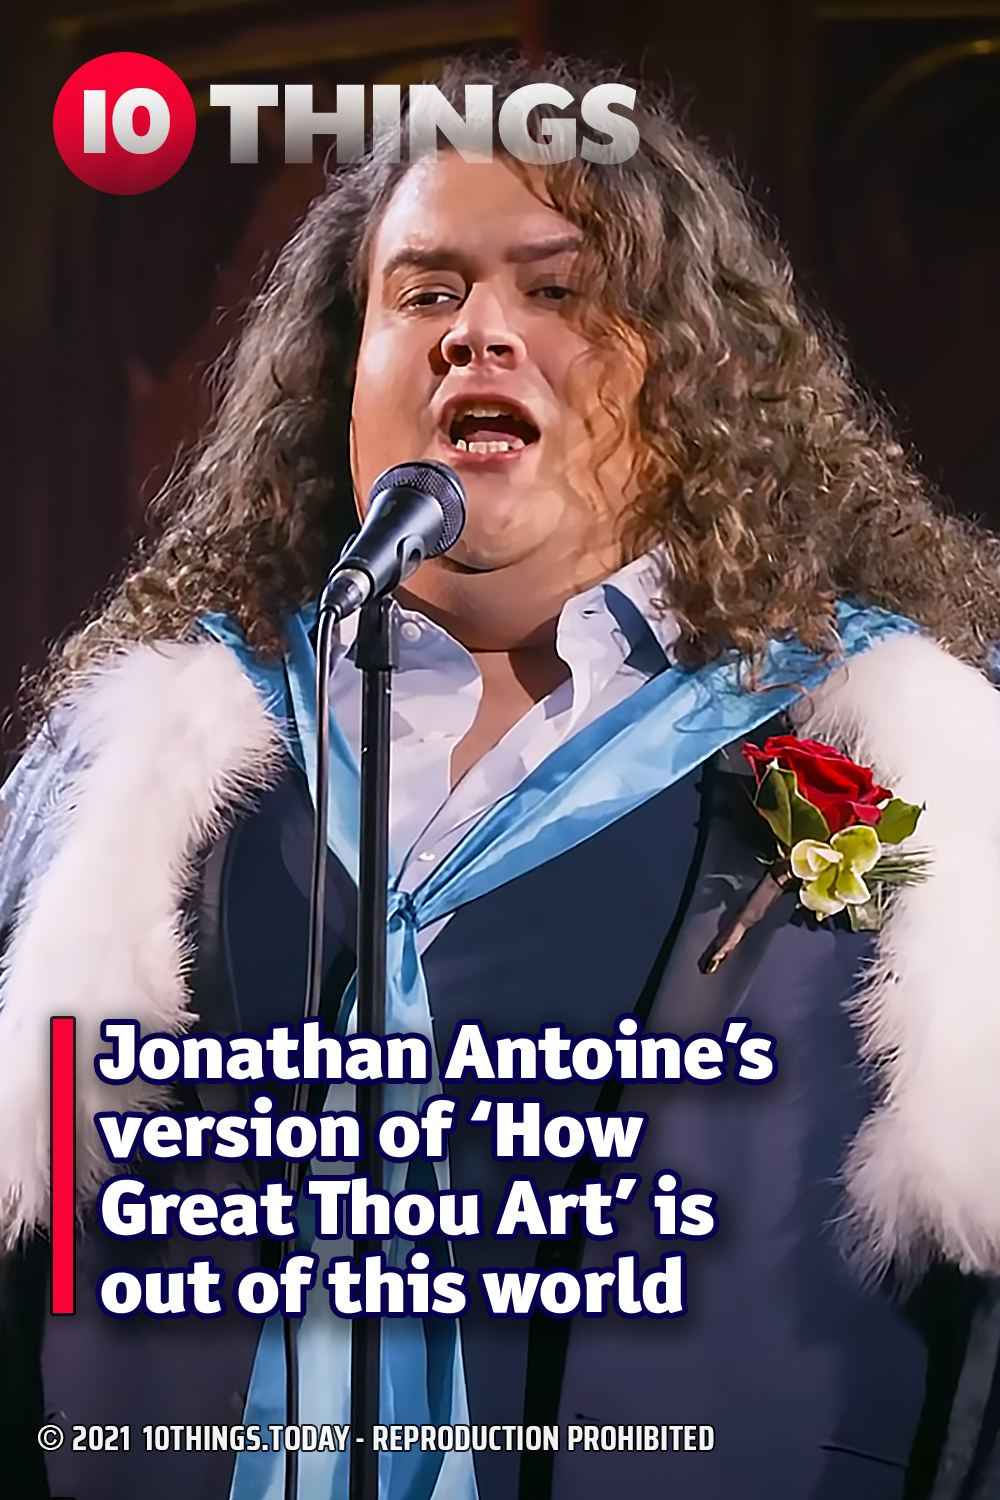 Jonathan Antoine’s version of ‘How Great Thou Art’ is out of this world